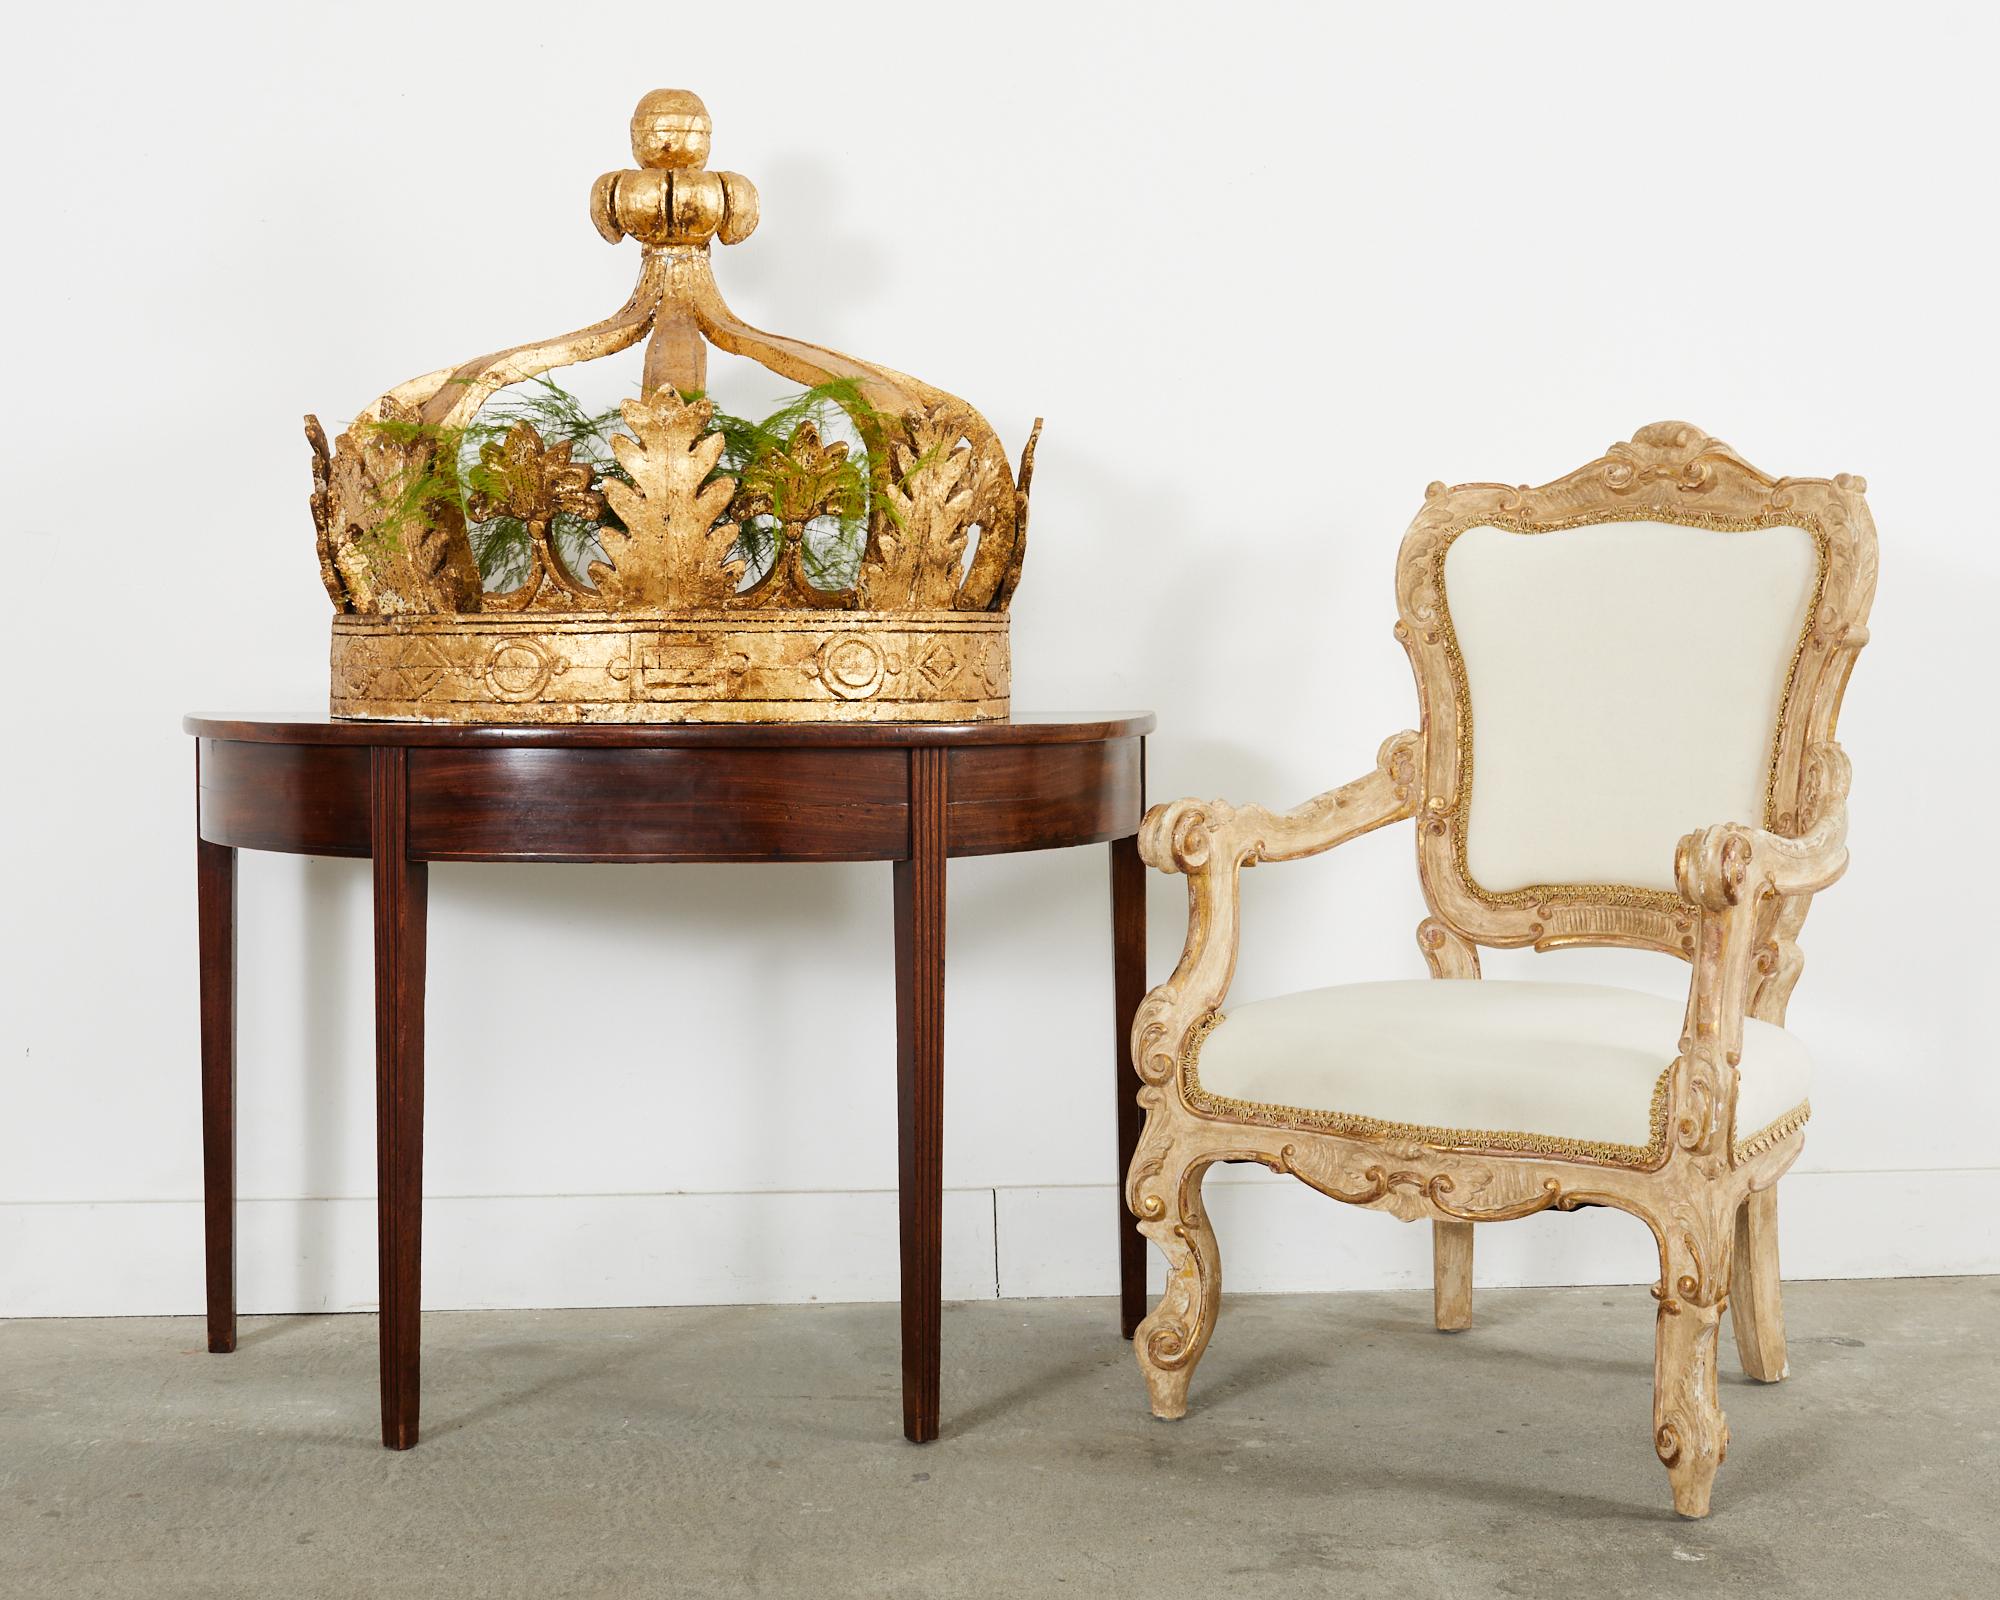 Spectacular hand-carved library armchair or throne chair crafted in the 18th century Italian Rococo taste by Hendrix Allardyce, Hollywood, CA. The chair features a large beech frame decorated with large scrolls, shell rocaille, and acanthus. The